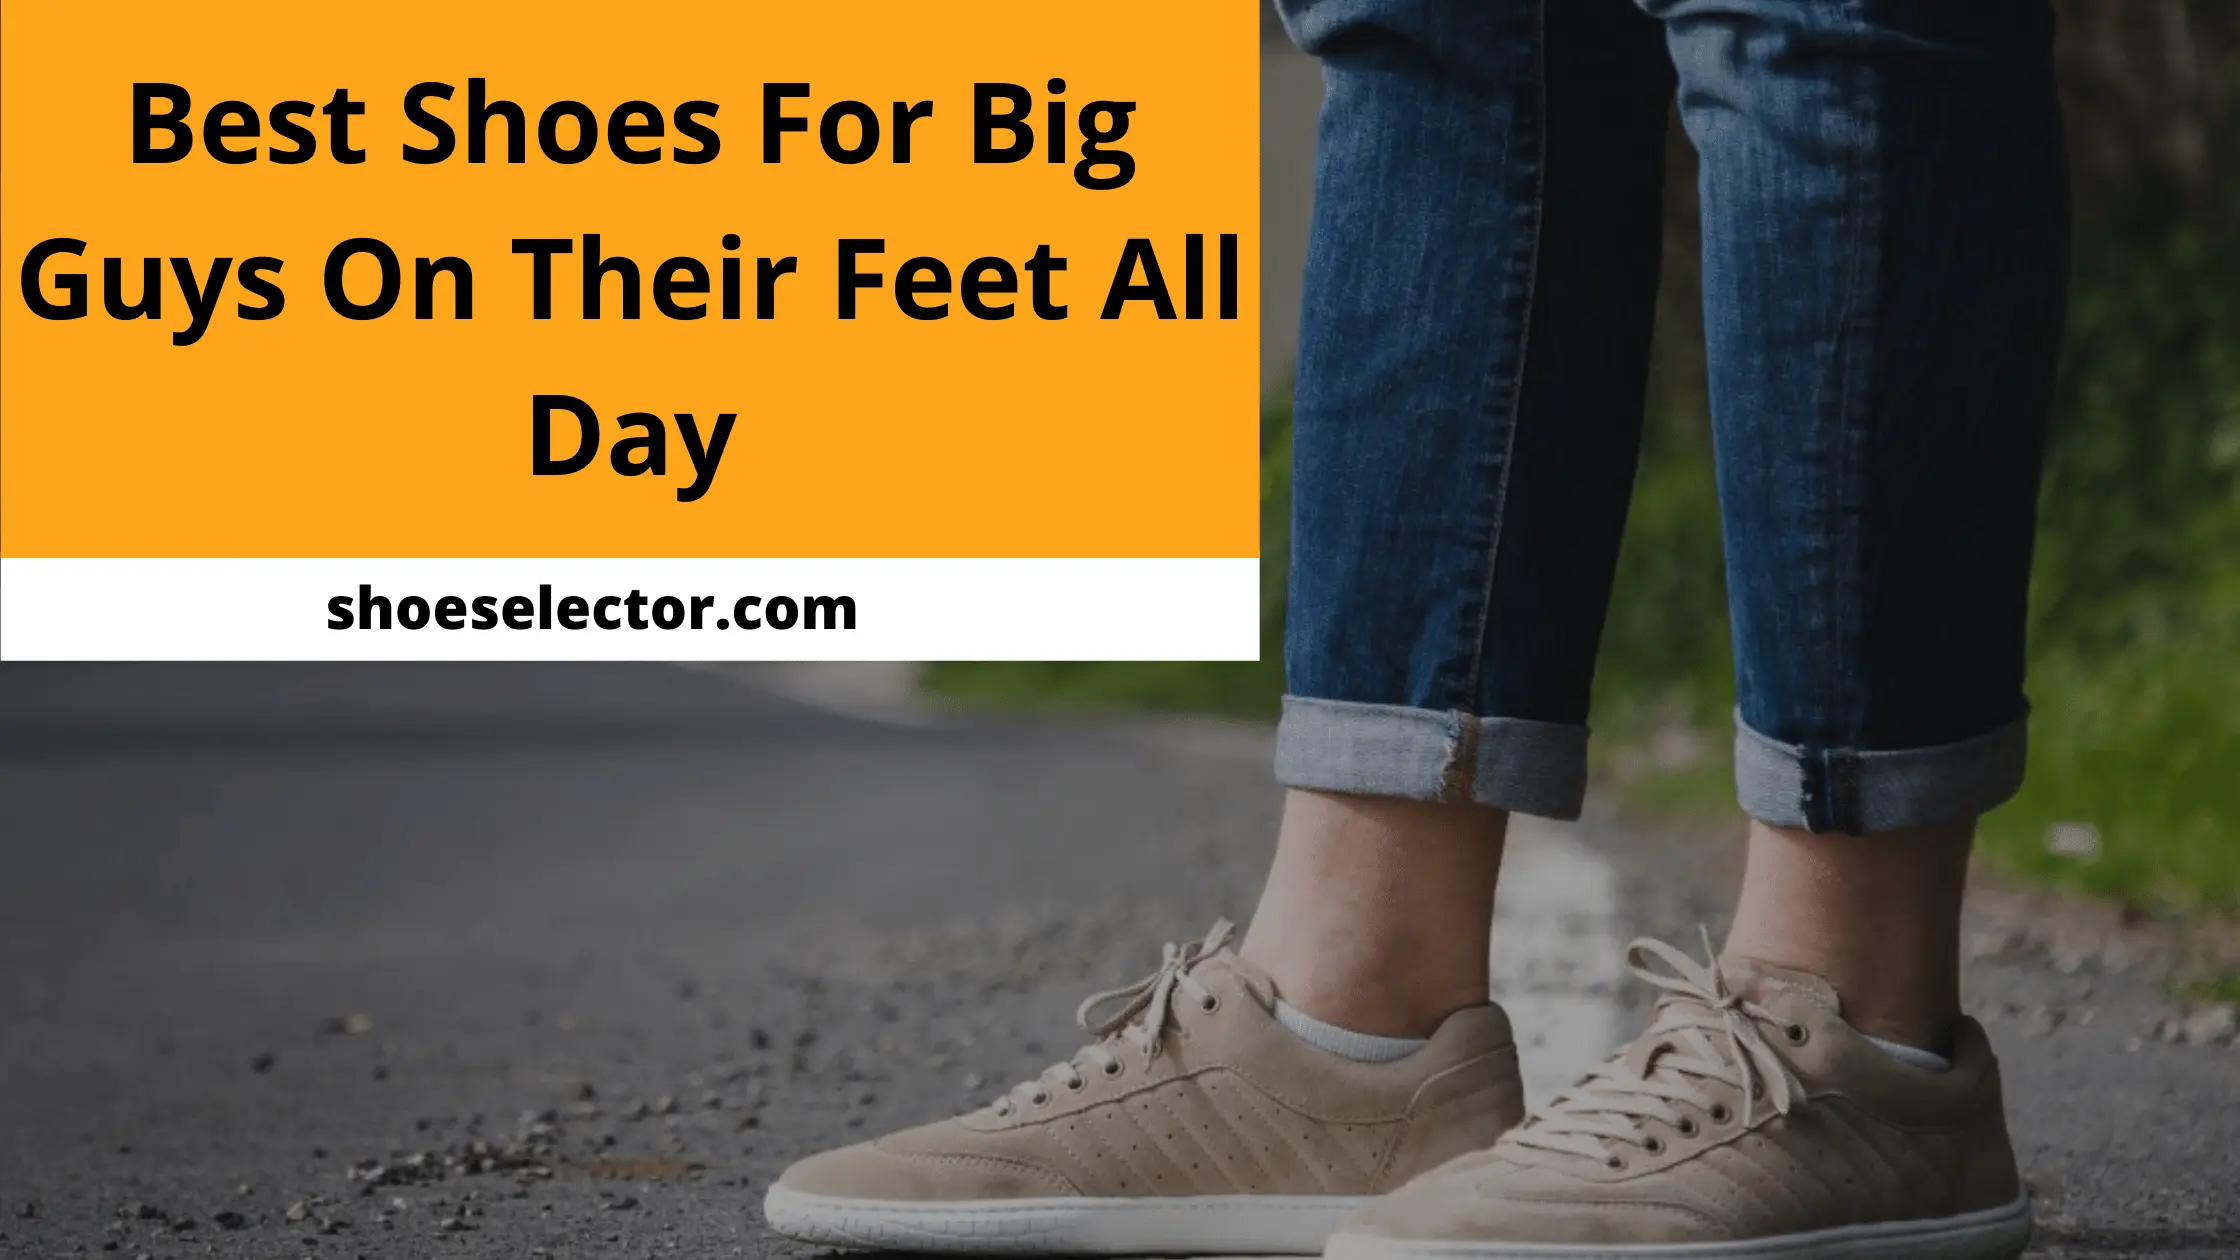 Best Shoes For Big Guys On Their Feet All Day - Latest Guide